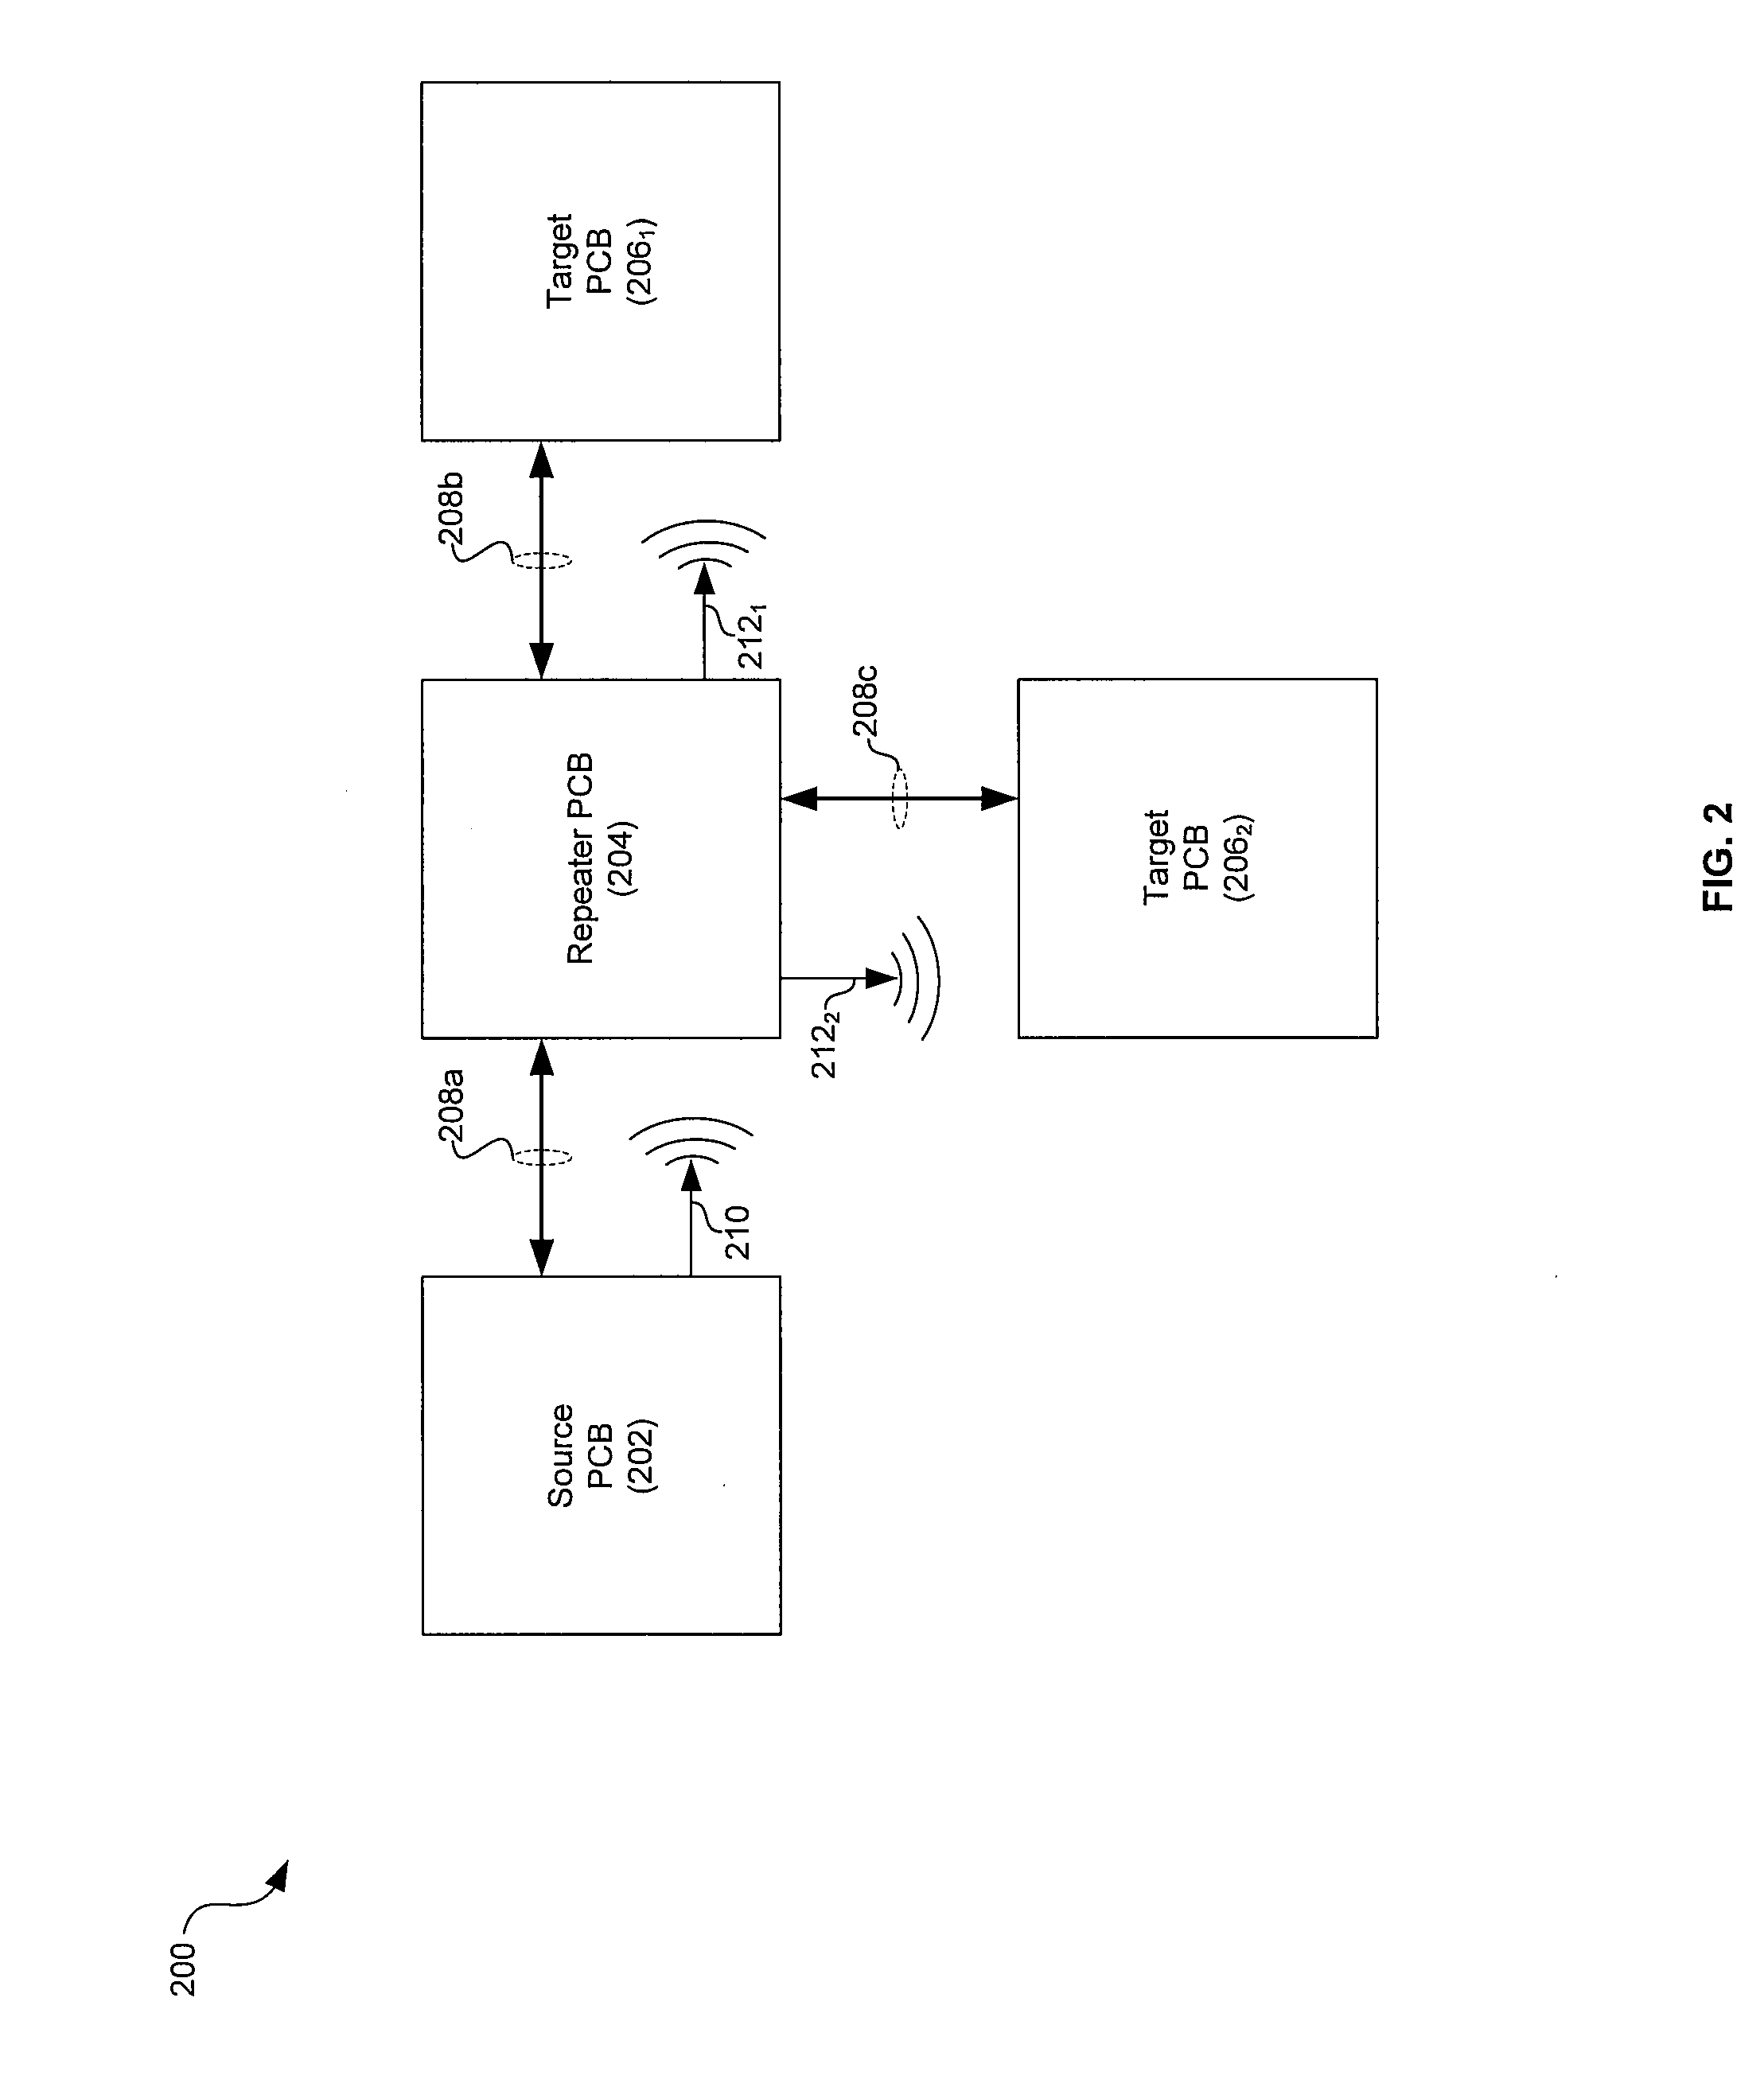 Method And System For Inter-PCB Communication Utilizing A Spatial Multi-Link Repeater